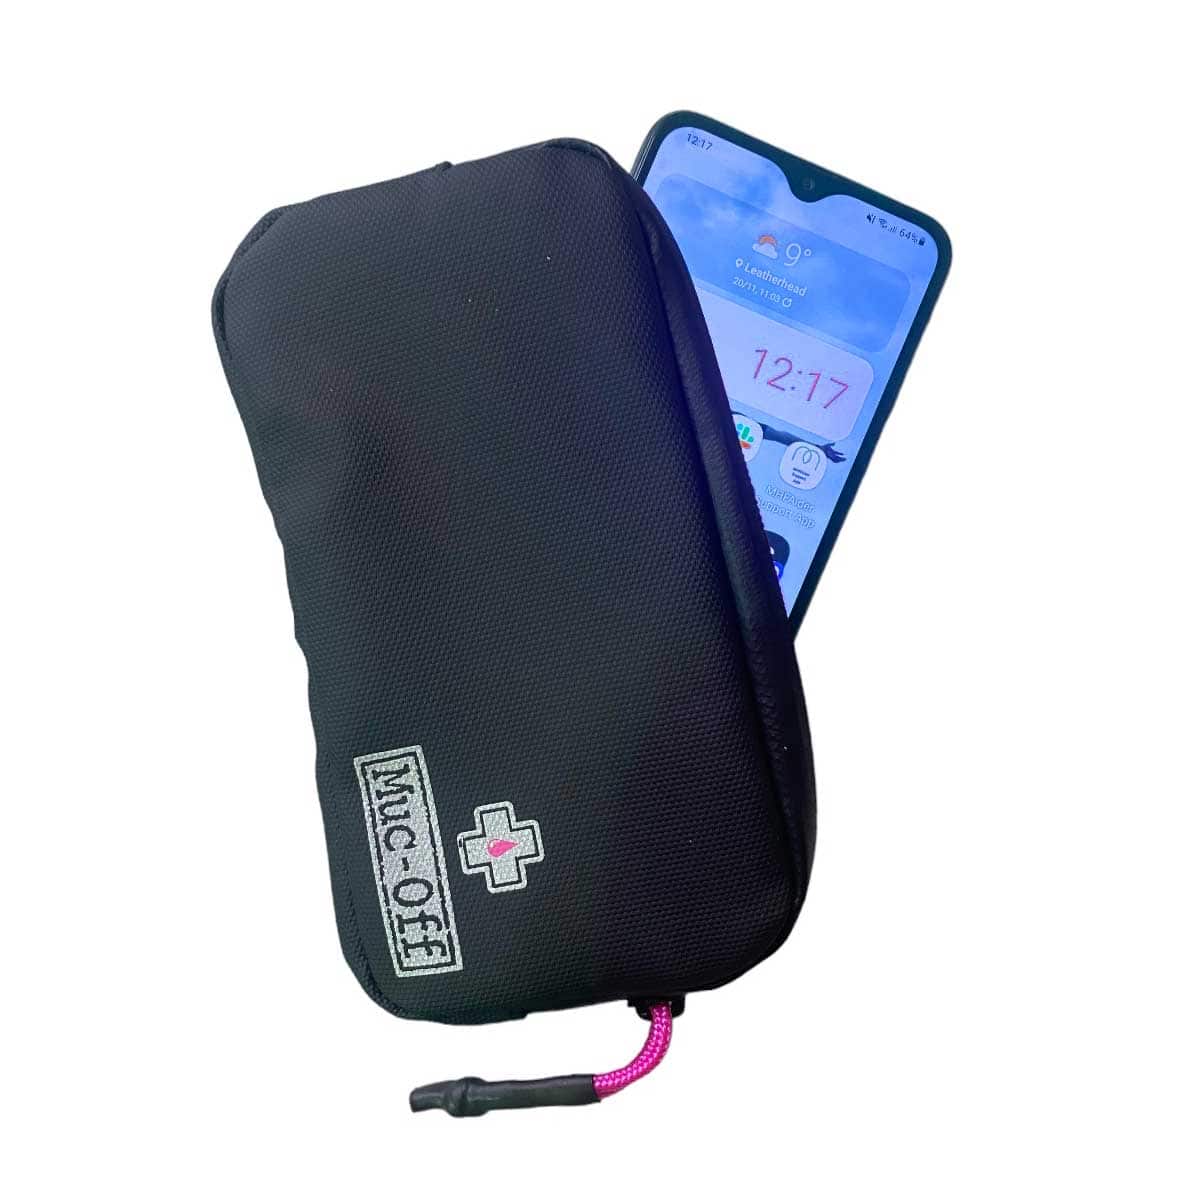 Keep your mnotorcycling essentials safe & ready-to-go with The Muc-Off Essentials Case - Phone